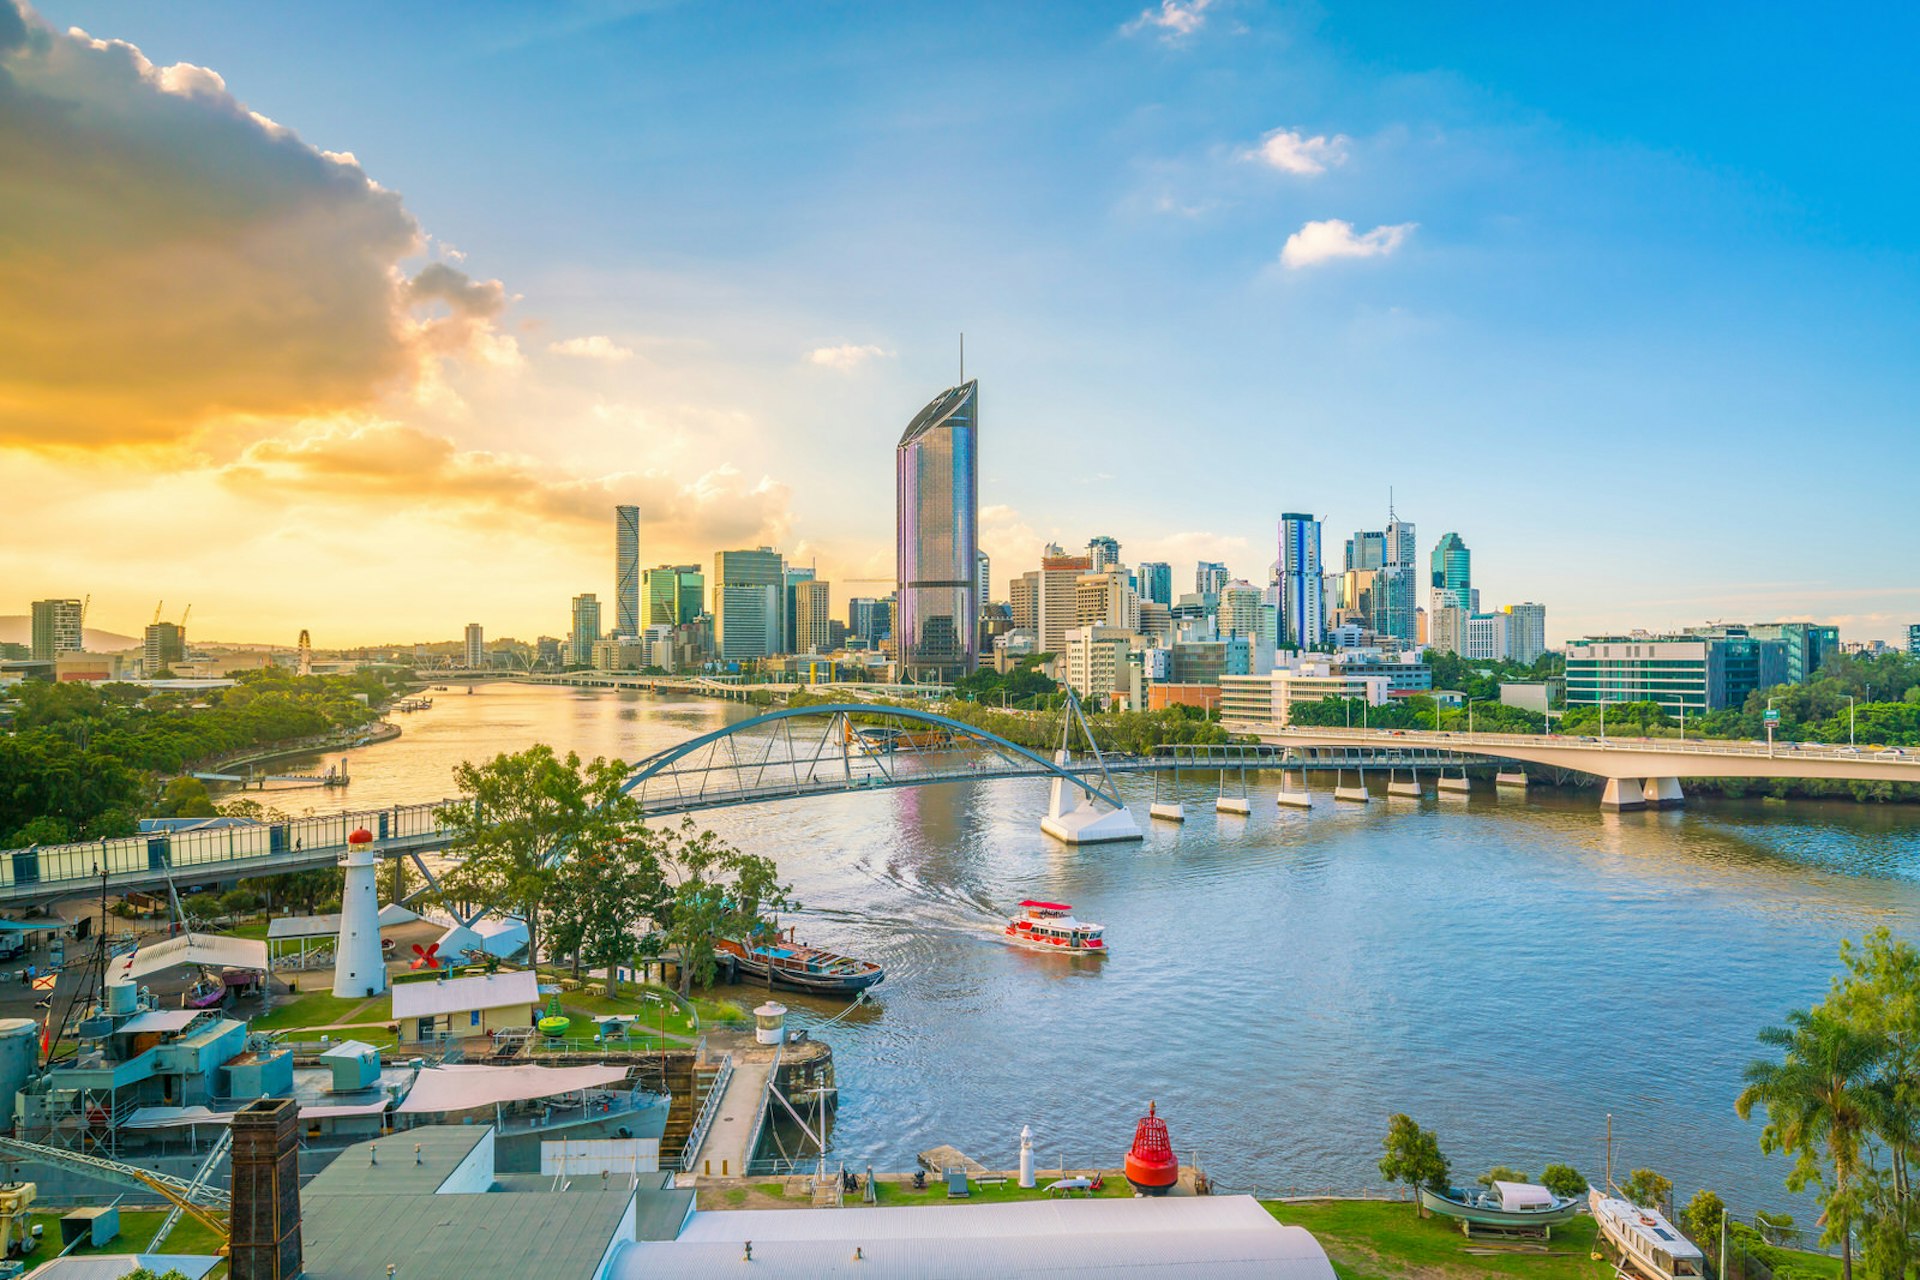 Looking down over the Brisbane River, with the city skyline of large glass towers in the background; the sky ranges from deep blue on the right to burning yellowy orange on the left, with the sun behind a bank of cloud; a small ferry makes its way under a bridge and towards the camera